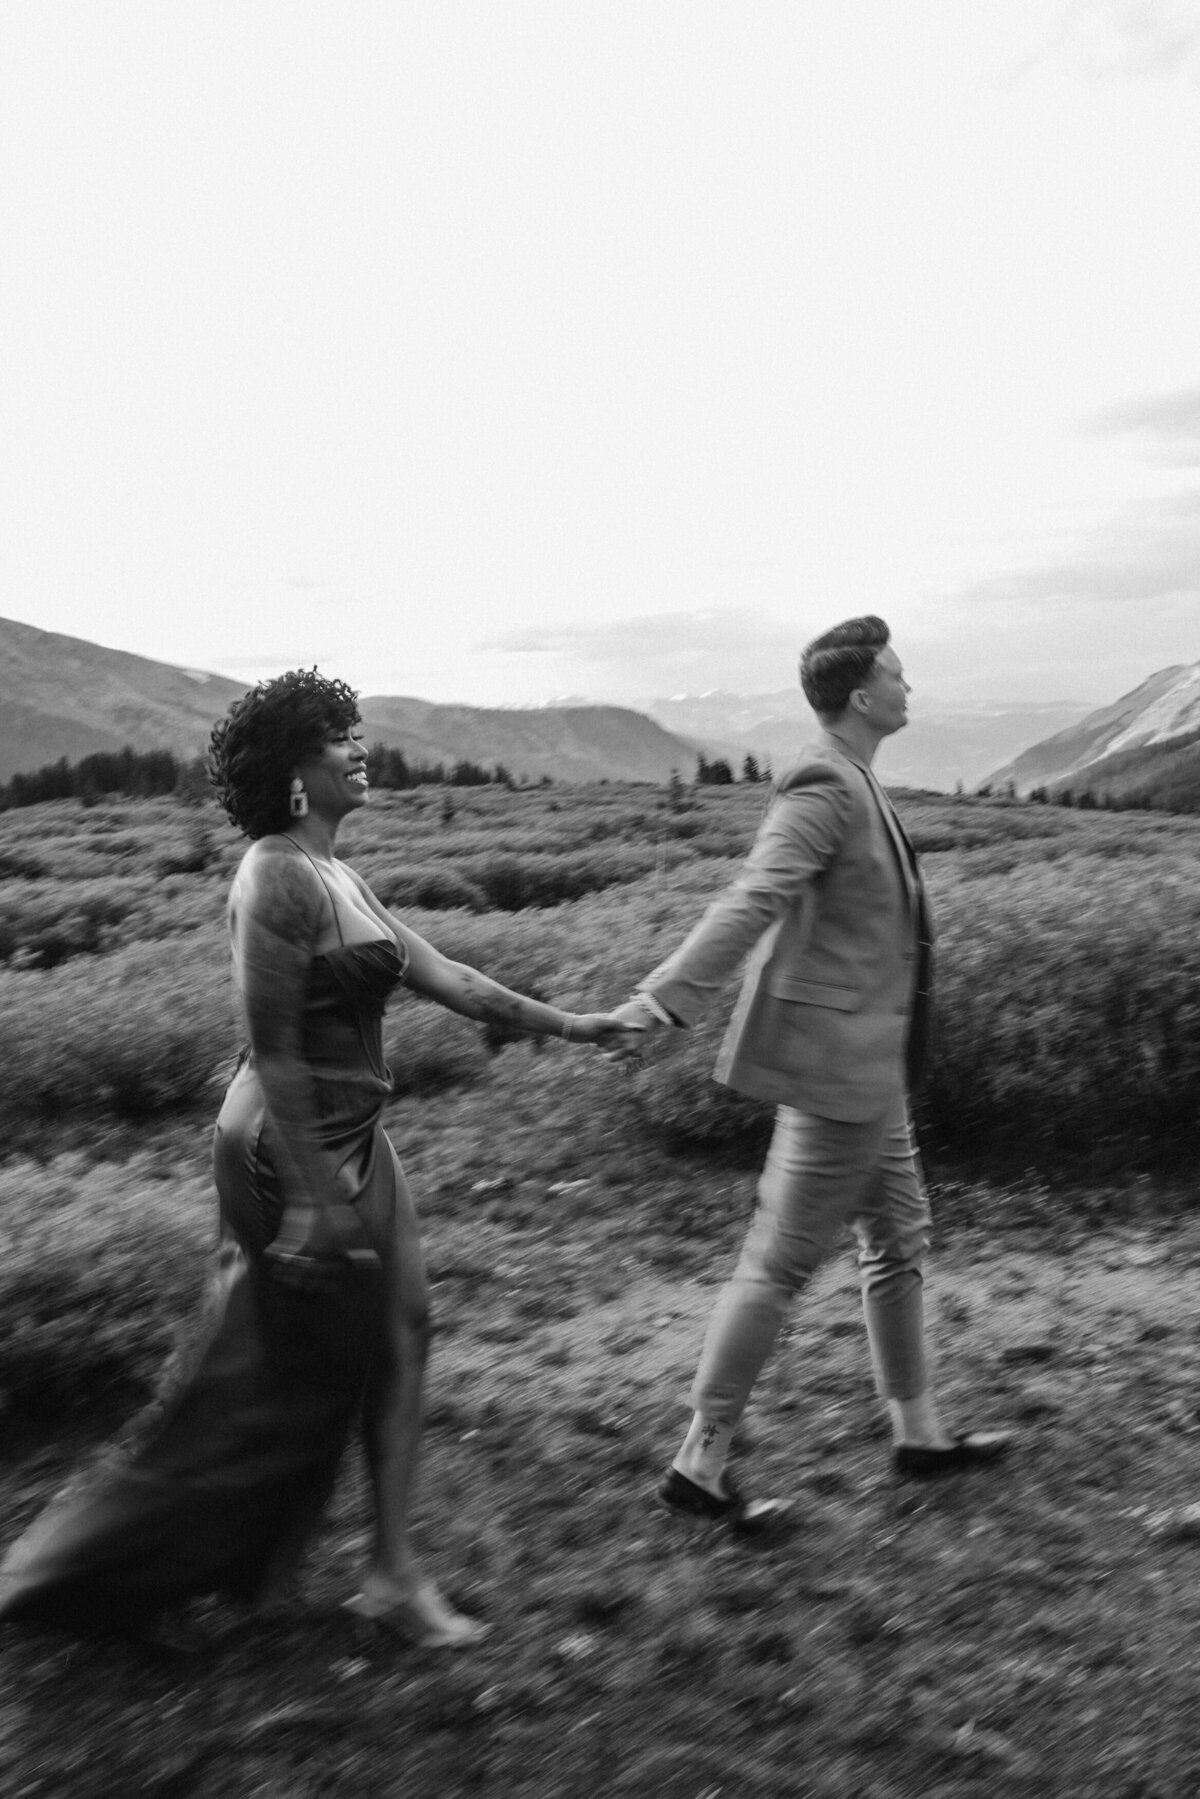 A black and white image capturing a dynamic moment of a couple holding hands and running through a vast field with mountains in the background